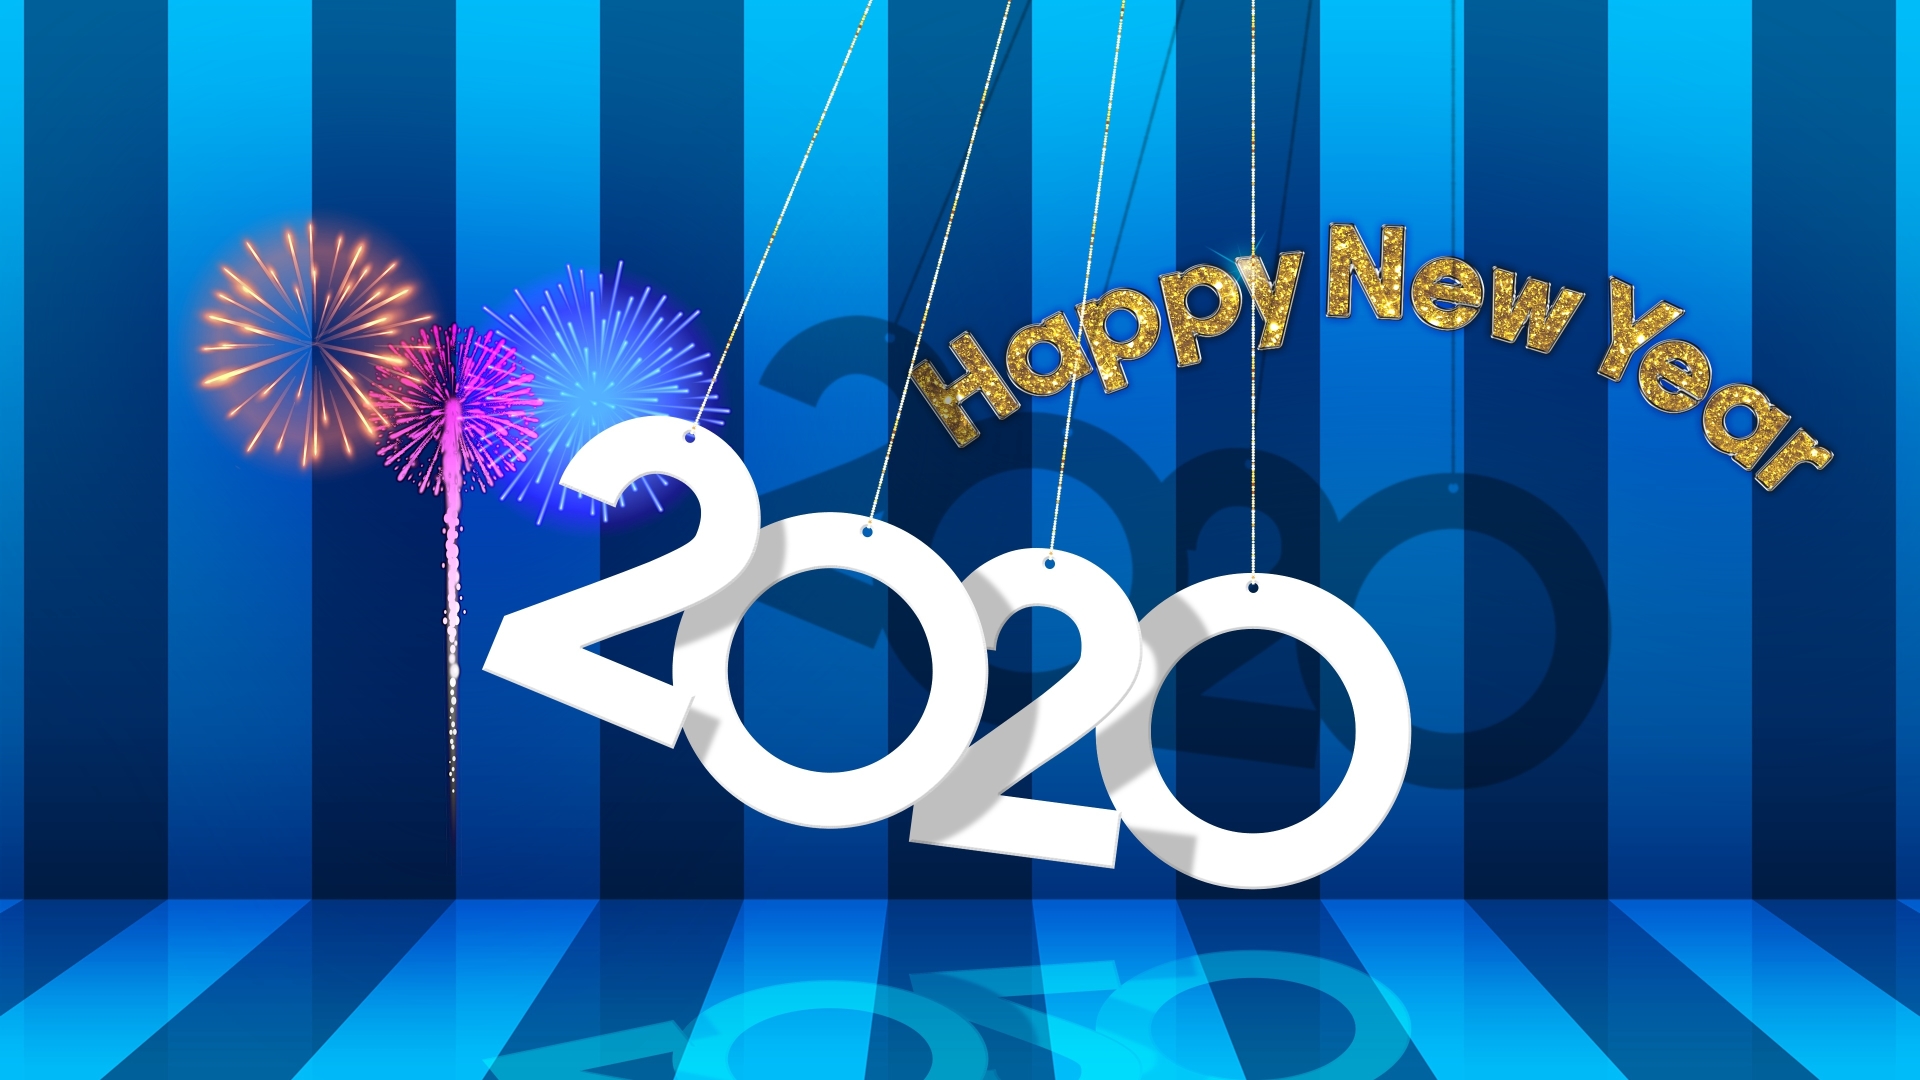 New Year 1080p Laptop Full HD Wallpaper Other